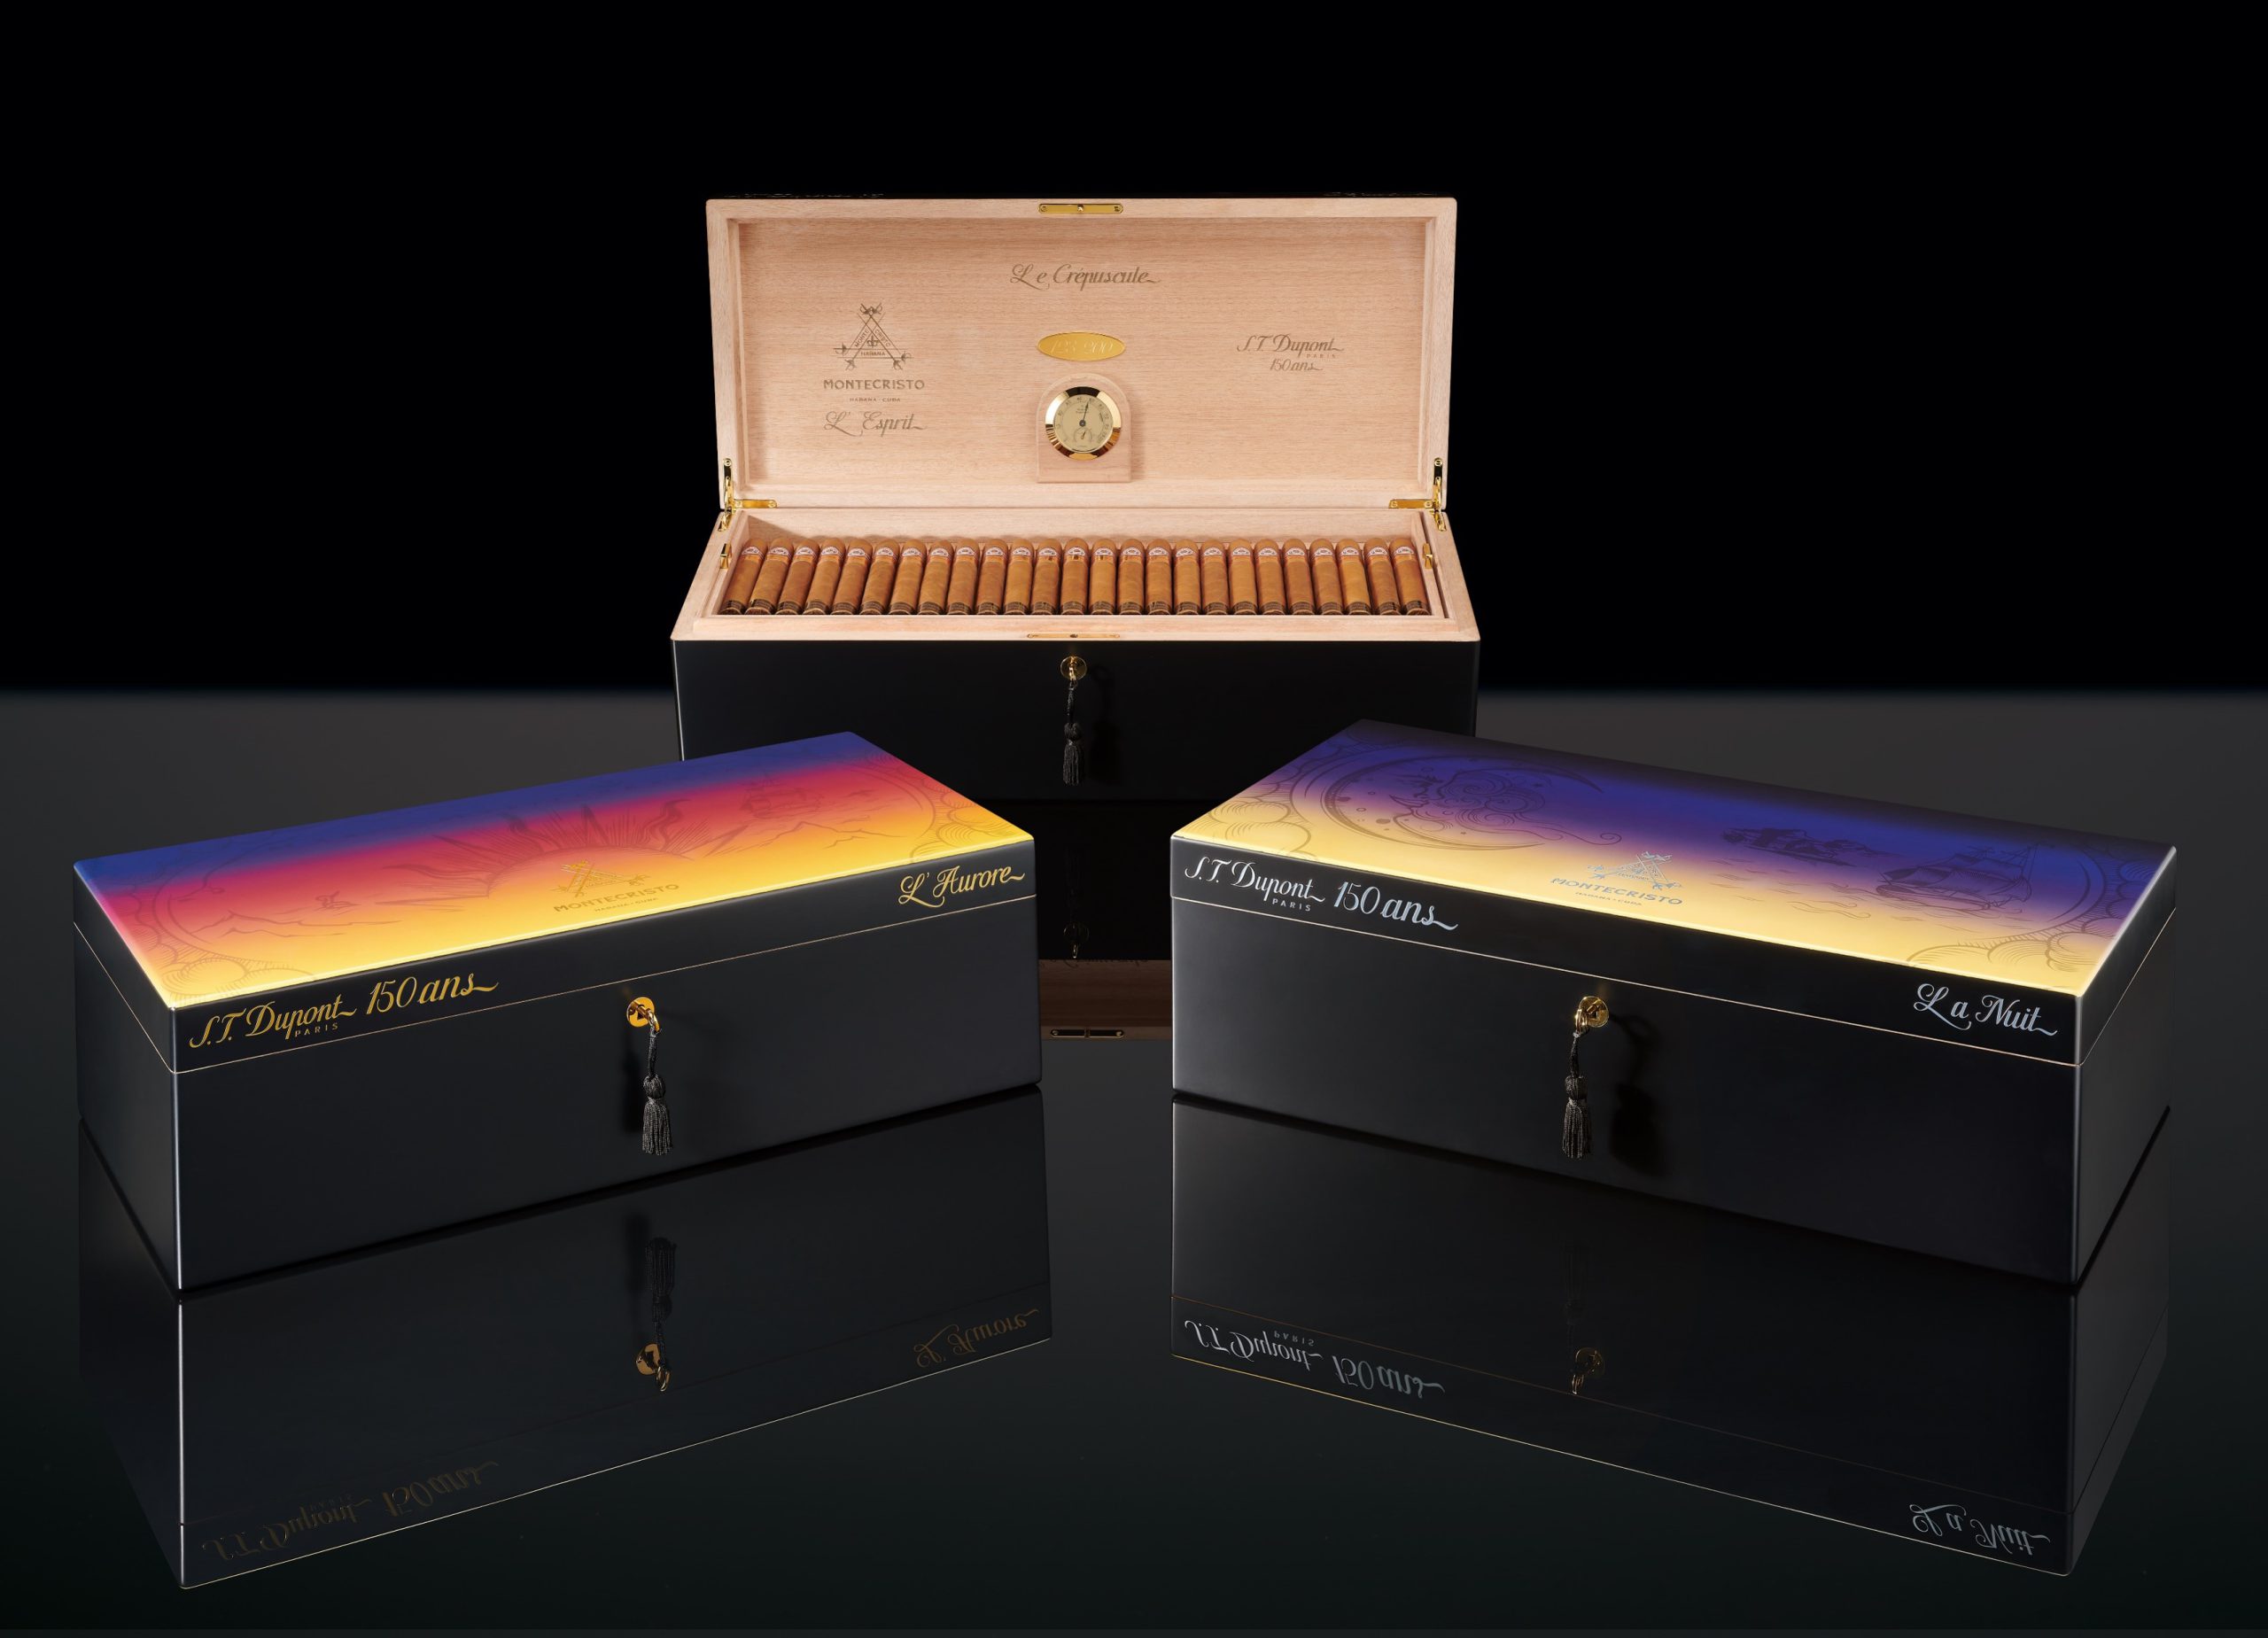 HABANOS, S.A. PRESENTED IN SWITZERLAND, IN A WORLD PREMIERE, THE MONTECRISTO L’ESPRIT x S.T. DUPONT COLLECTION